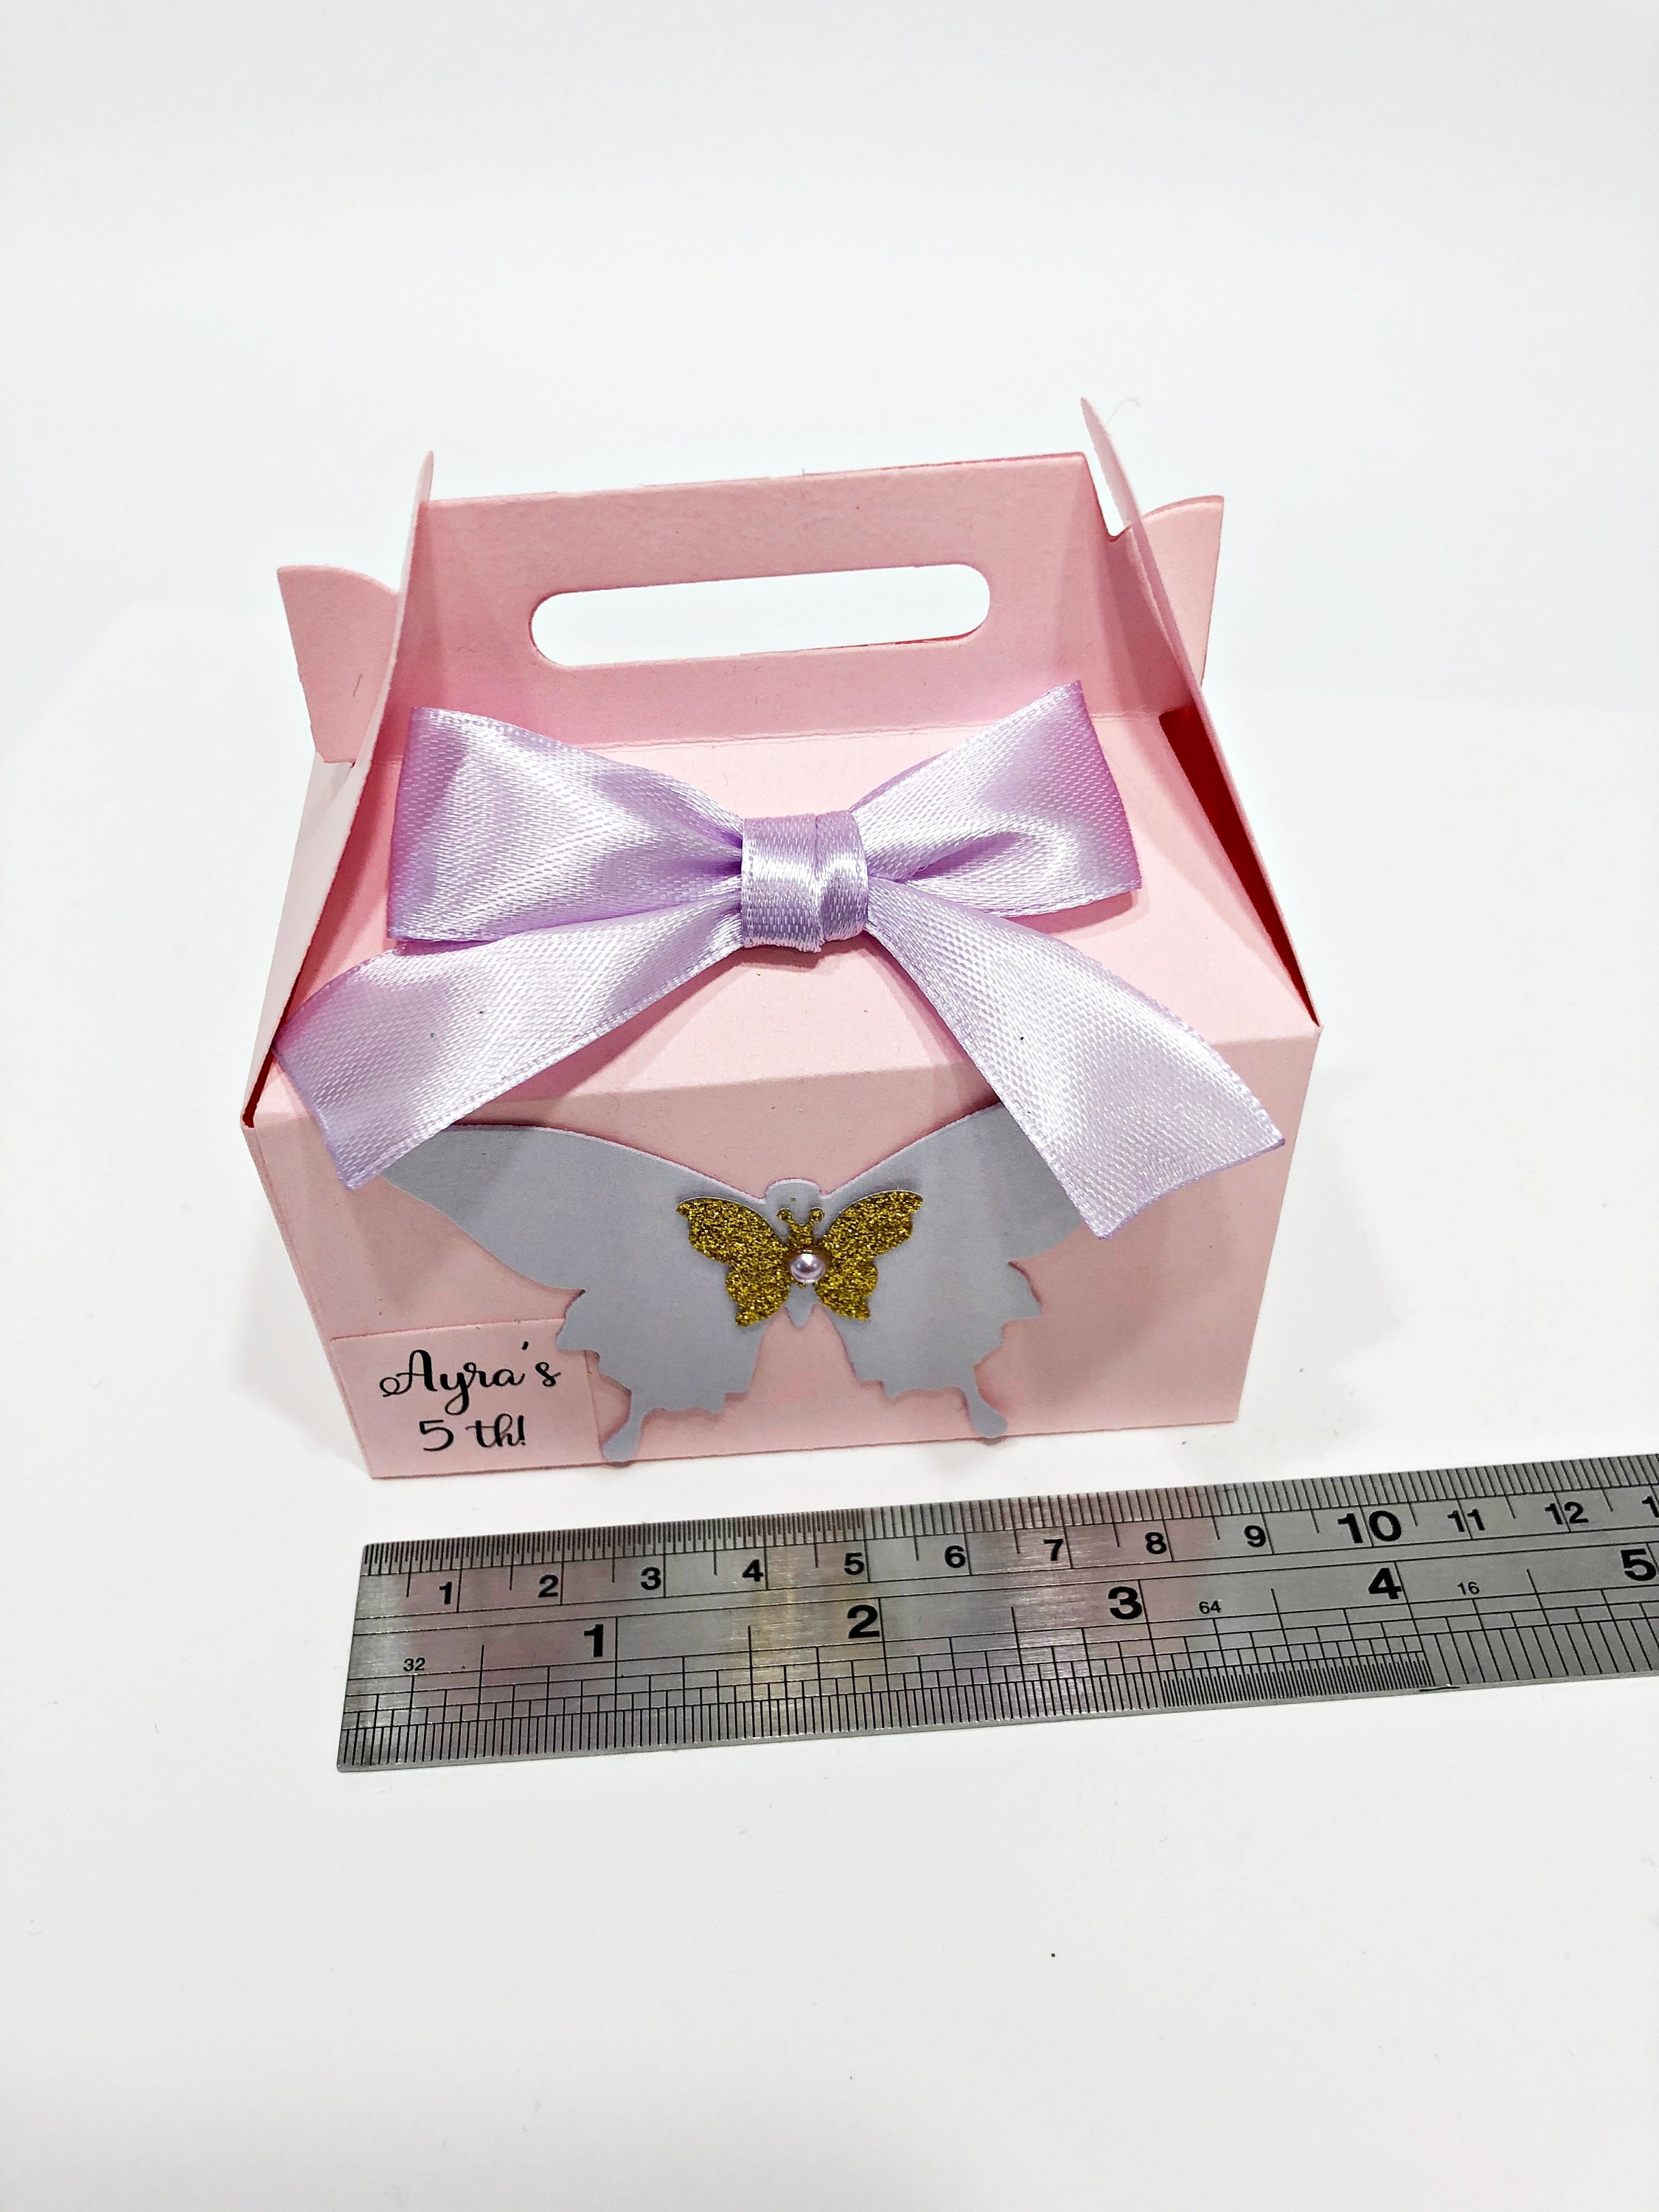 Tulle bow and gable box so cute! Great to give as favors